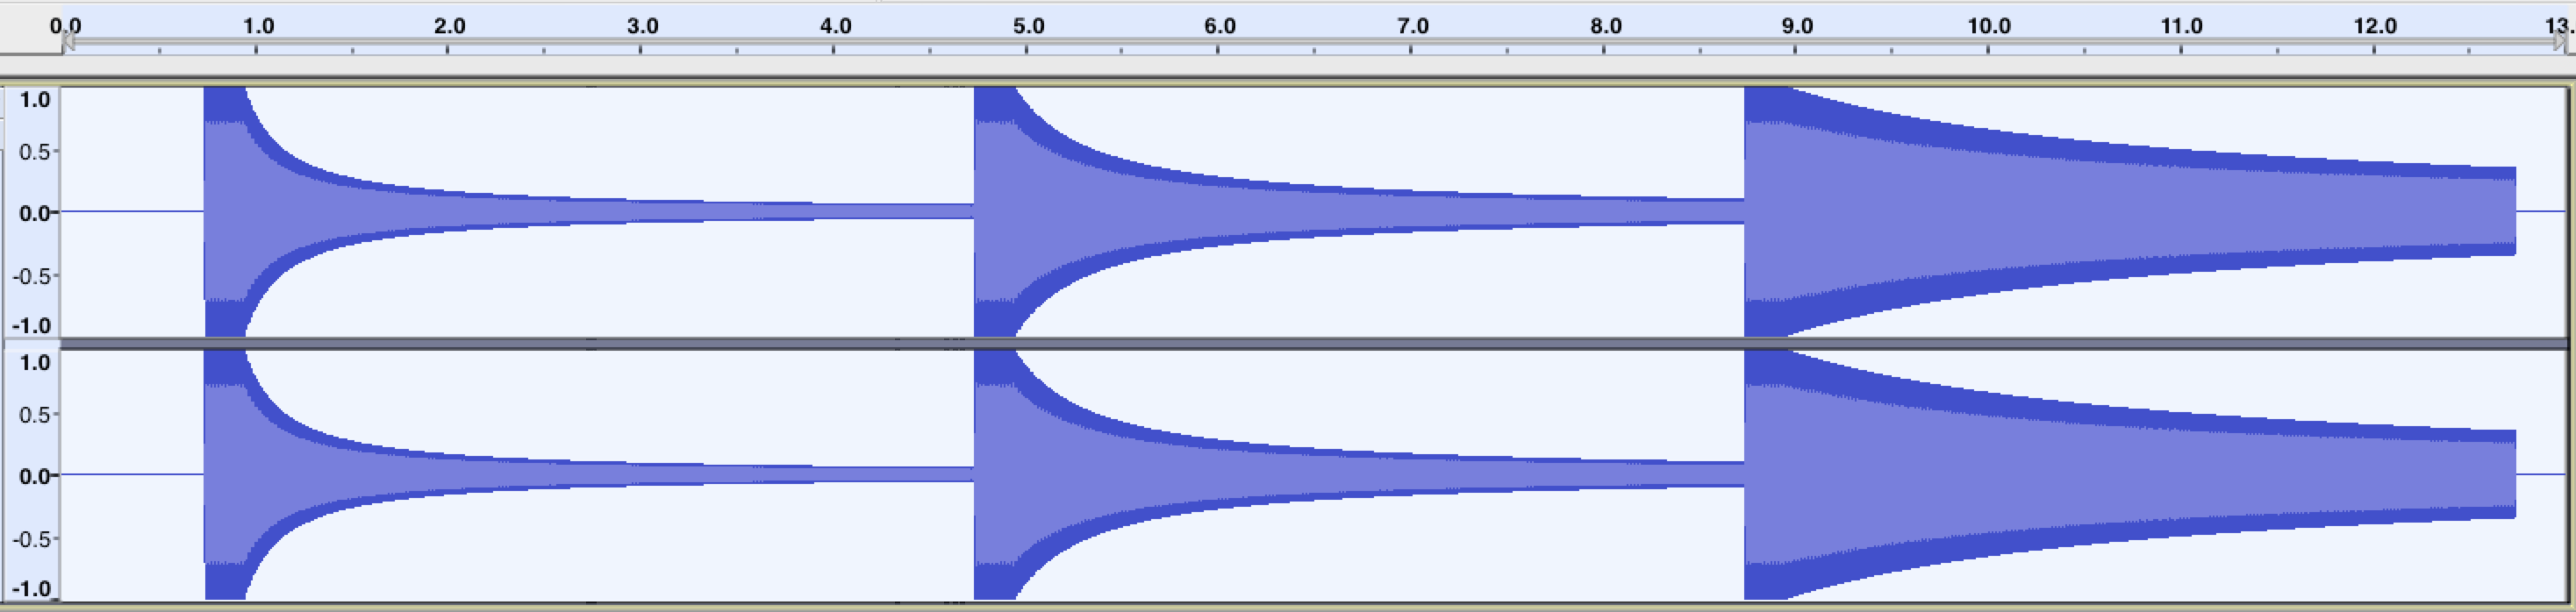 A waveform visualisation of three oscillator tones produced in Web Audio. Each oscillator moves away from the listener at the same speed, but with different rolloffFactors affecting the resulting volume decay.